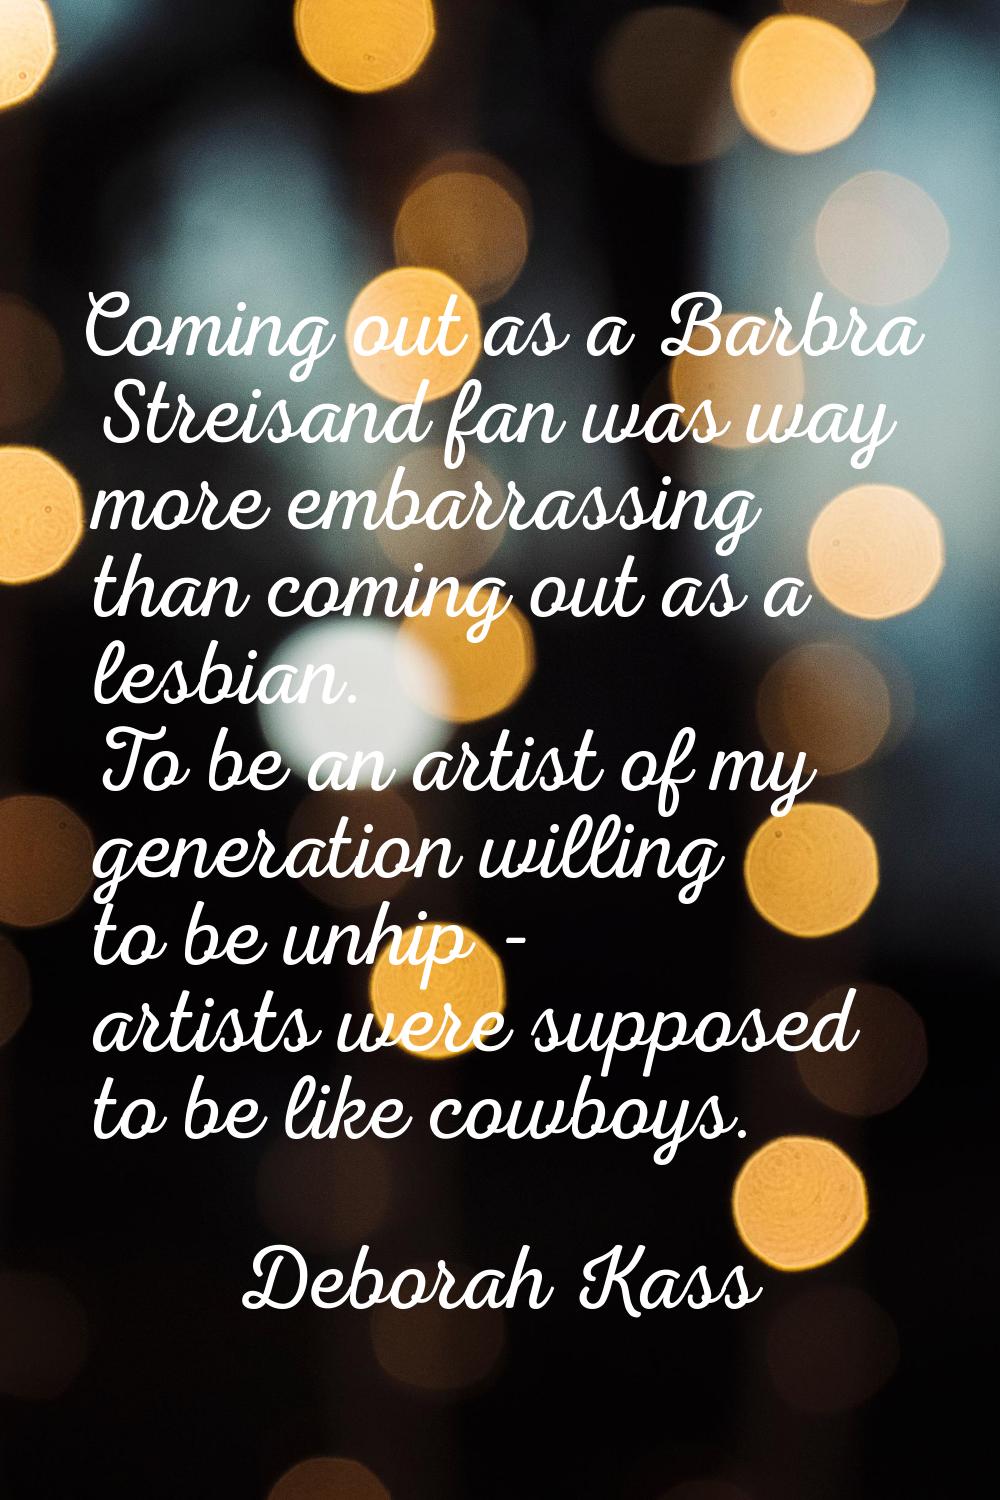 Coming out as a Barbra Streisand fan was way more embarrassing than coming out as a lesbian. To be 